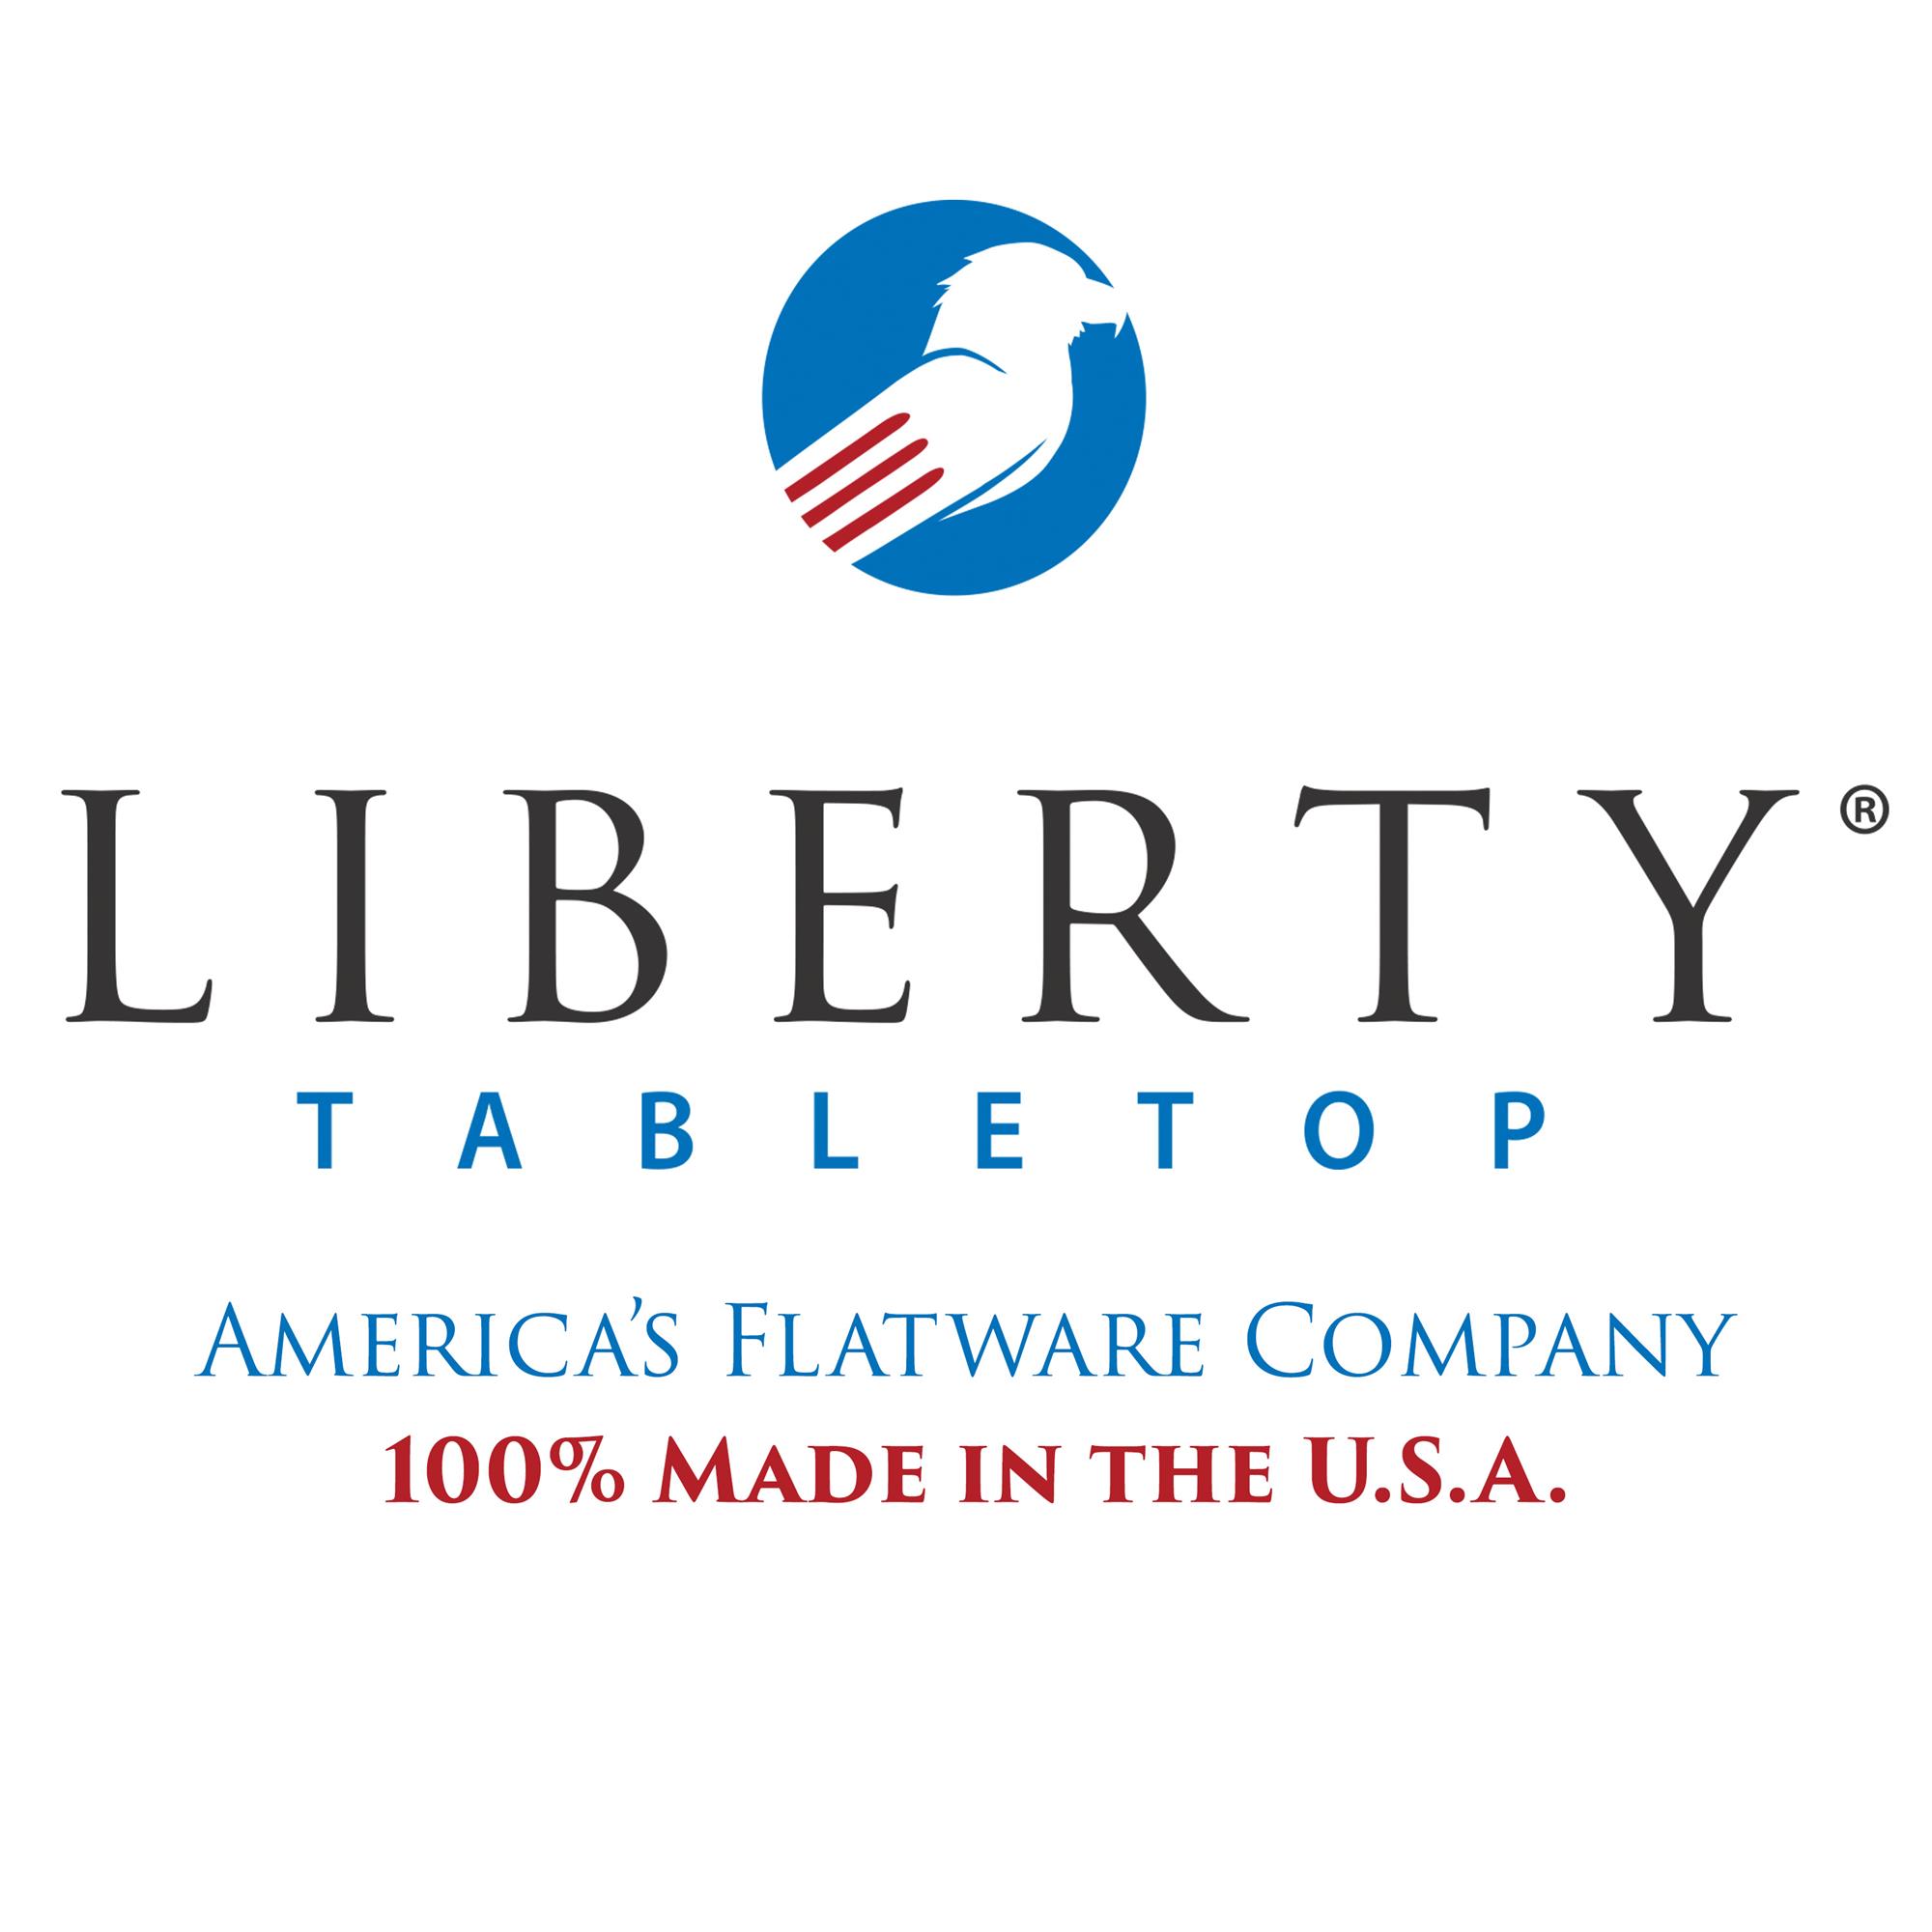 In Partnership with libertytabletop.com